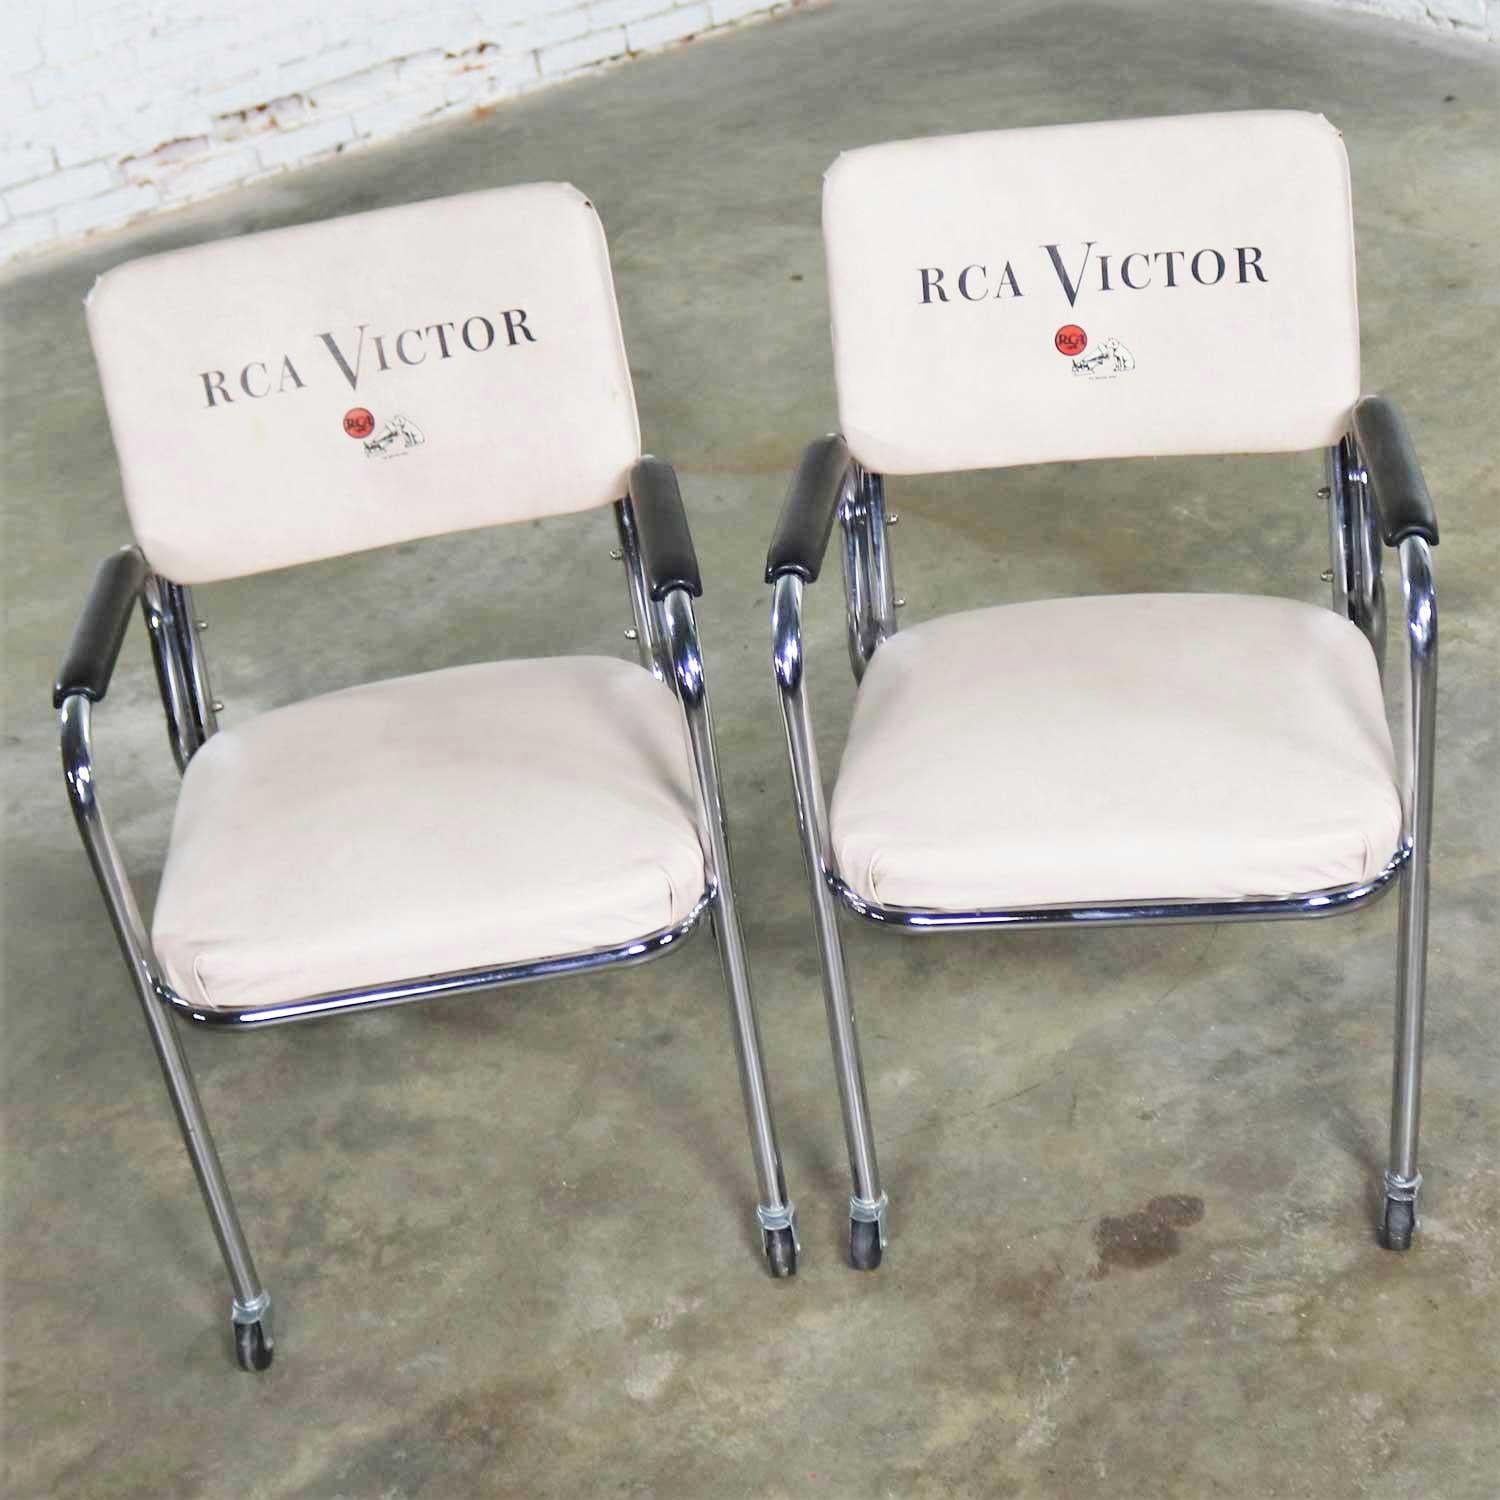 Incredible vintage Art Deco, Streamline Modern, or Art Moderne rolling chrome and vinyl RCA Victor advertising chairs made by Chromcraft. They are in wonderful vintage condition. There is a repair to the vinyl in the front of one of the back rests.